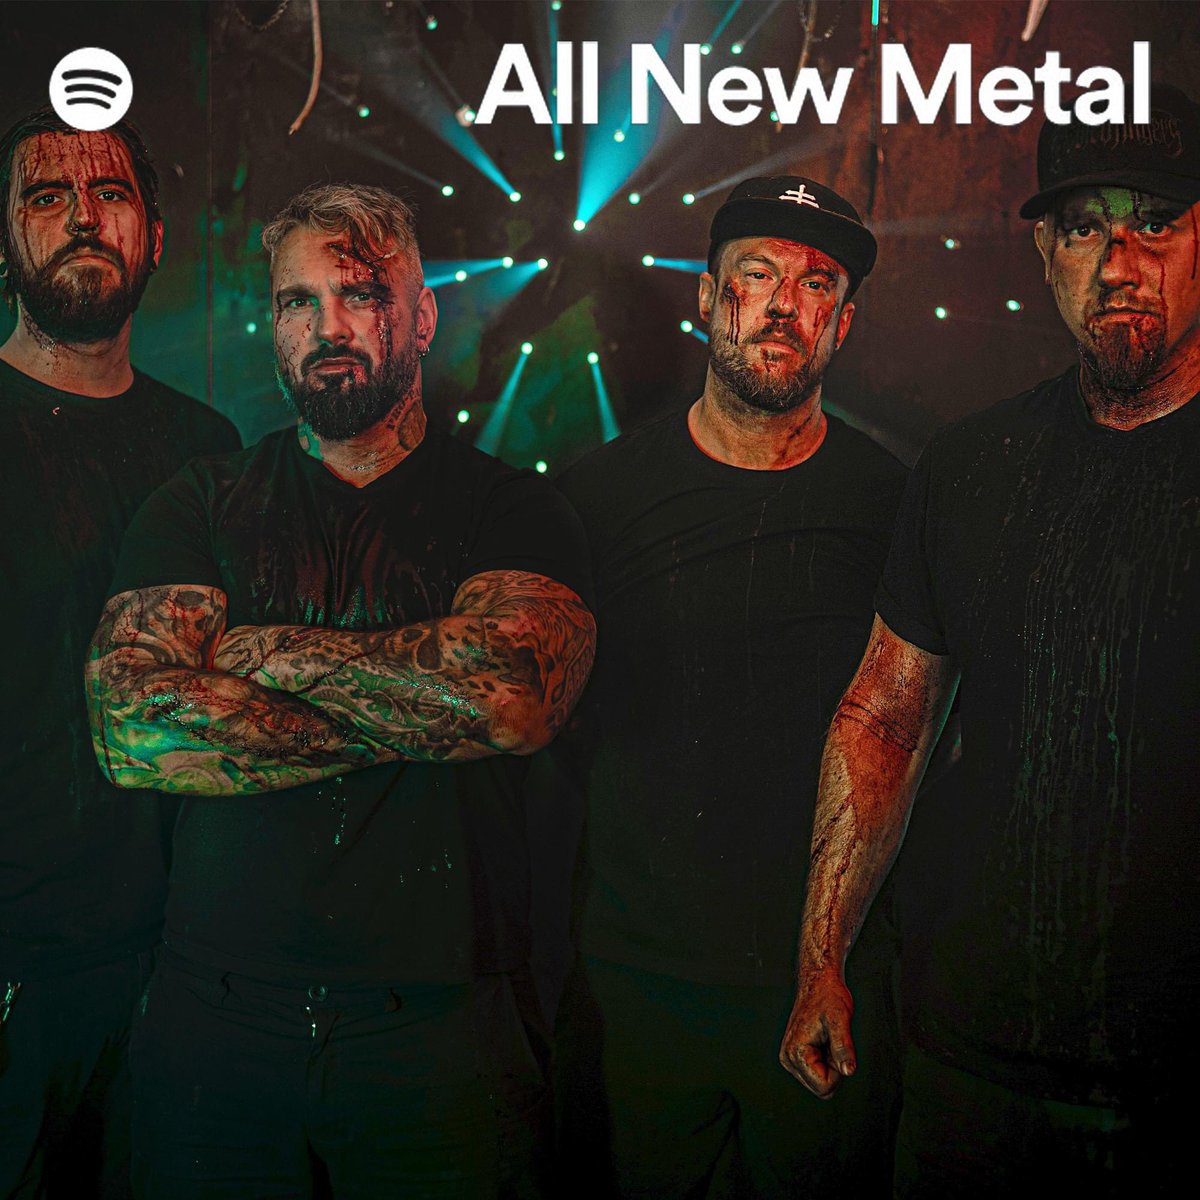 We did it! Thanks all for streaming 🔥
Our latest “OUT OF TIME” got added to the big one - All New Metal. More than 700k metalheads strong

Stream here: open.spotify.com/playlist/37i9d…

#metalmusic #metalheads #metal #allnewmetal #metalspotify #metalplaylist